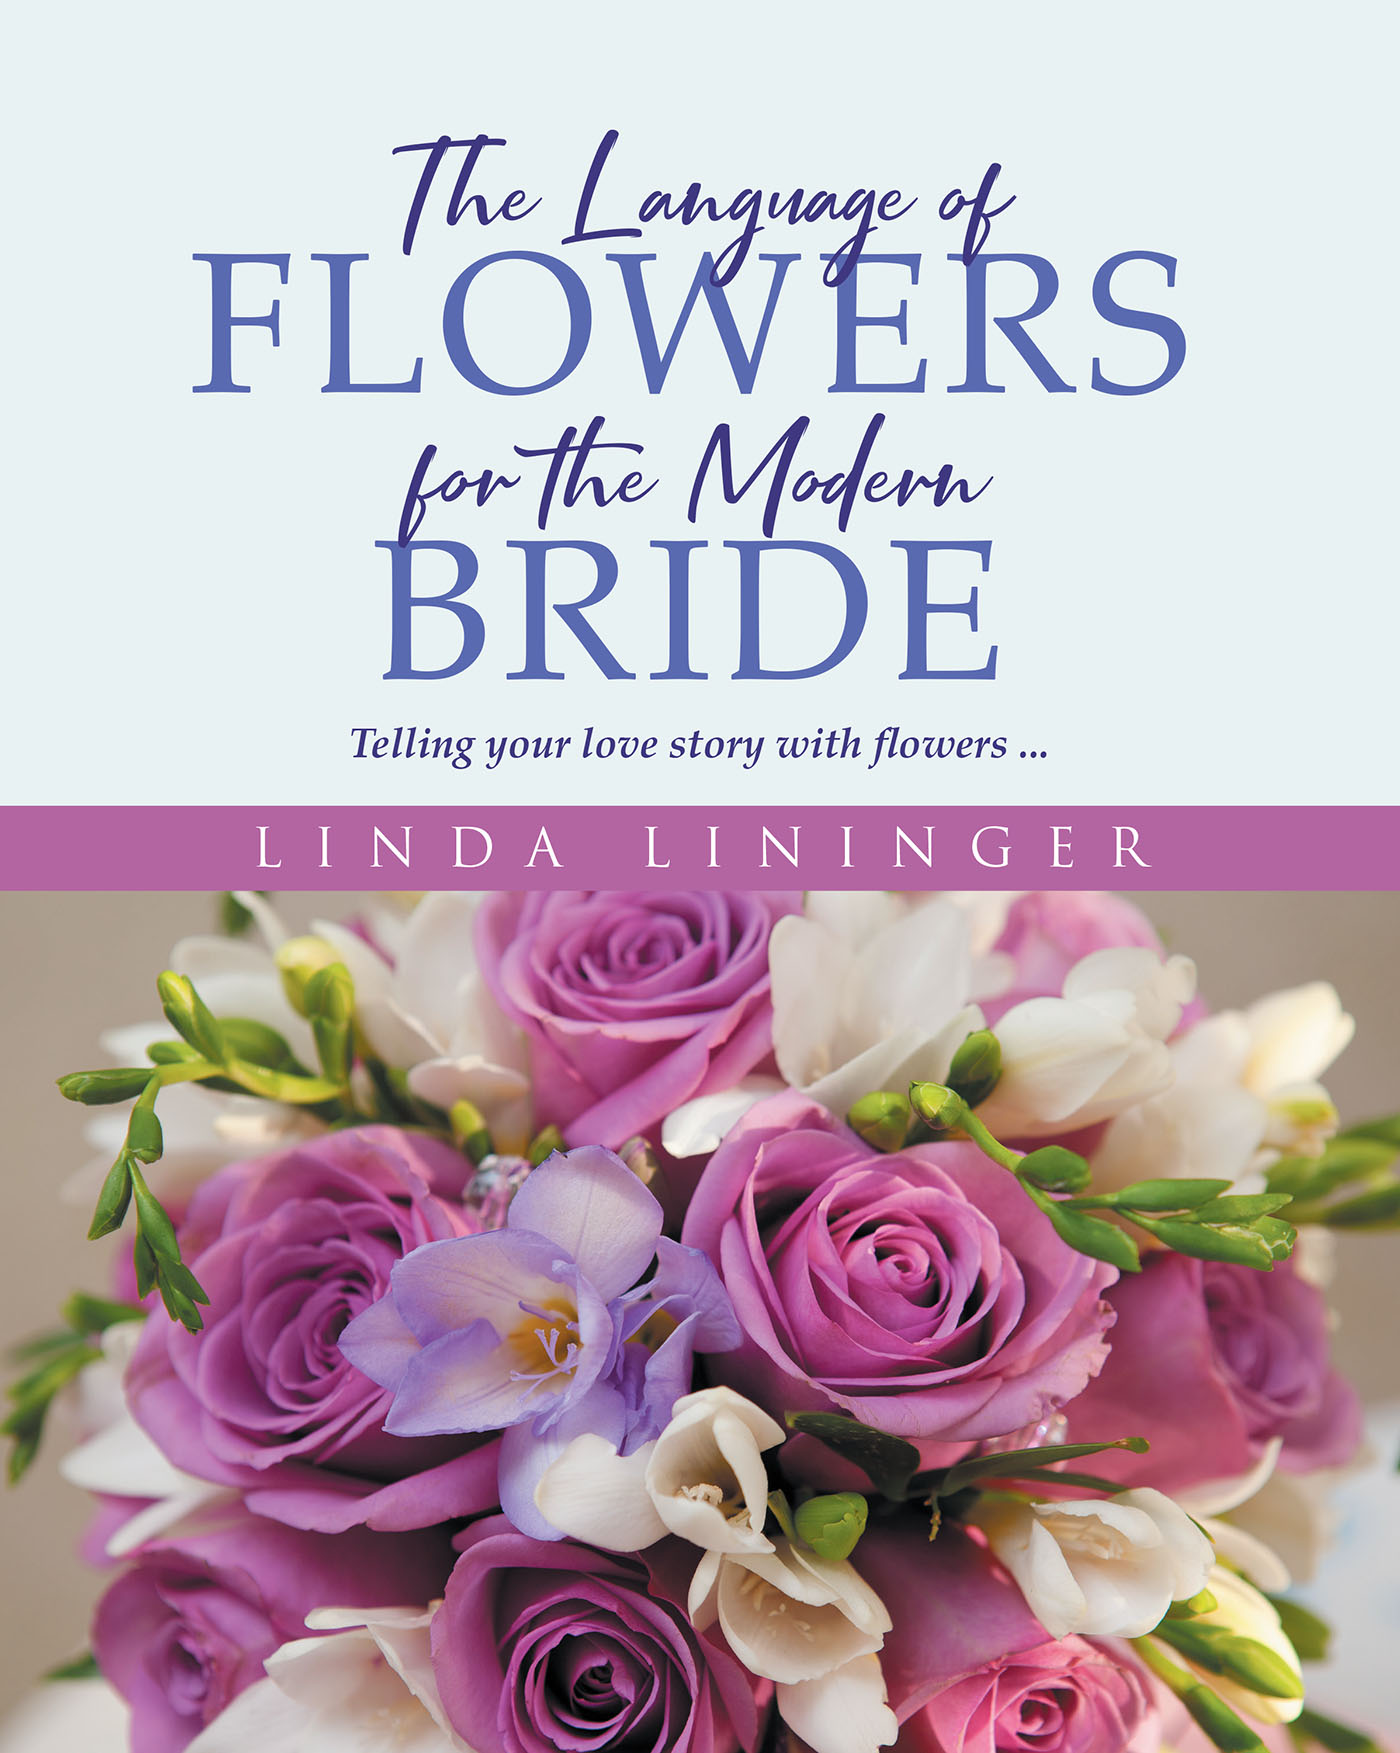 Author Linda Lininger’s New Book, “The Language of Flowers for the Modern Bride,” Explores How Brides Can Define Their Wedding Day and Tell Their Love Story with Flowers